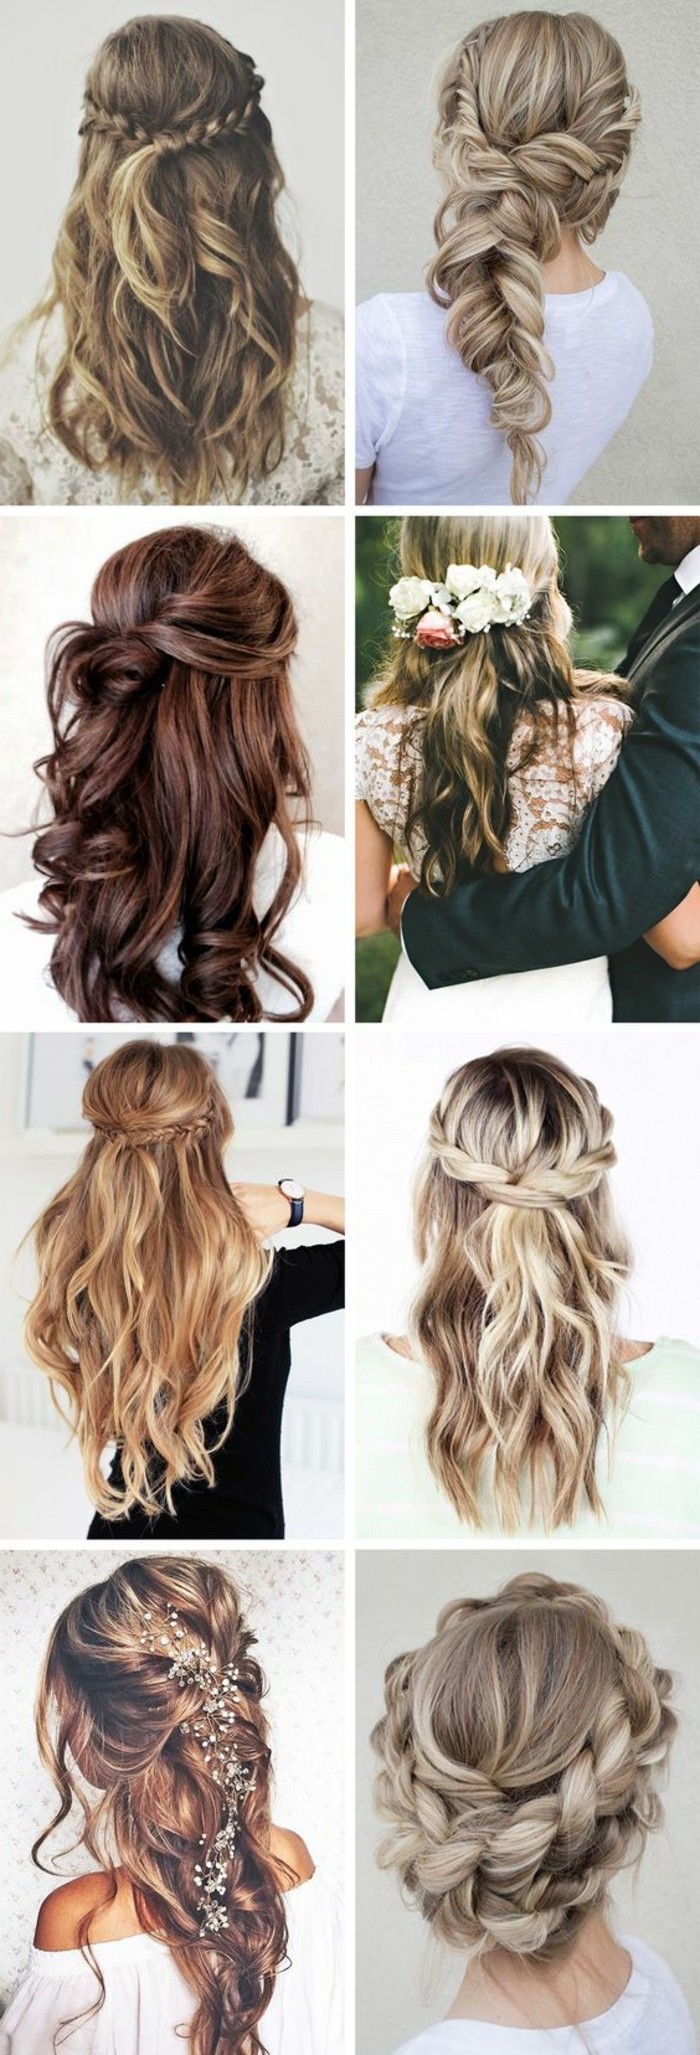 side by side pictures, different hairstyles, hairstyles for homecoming, brown and blonde hair